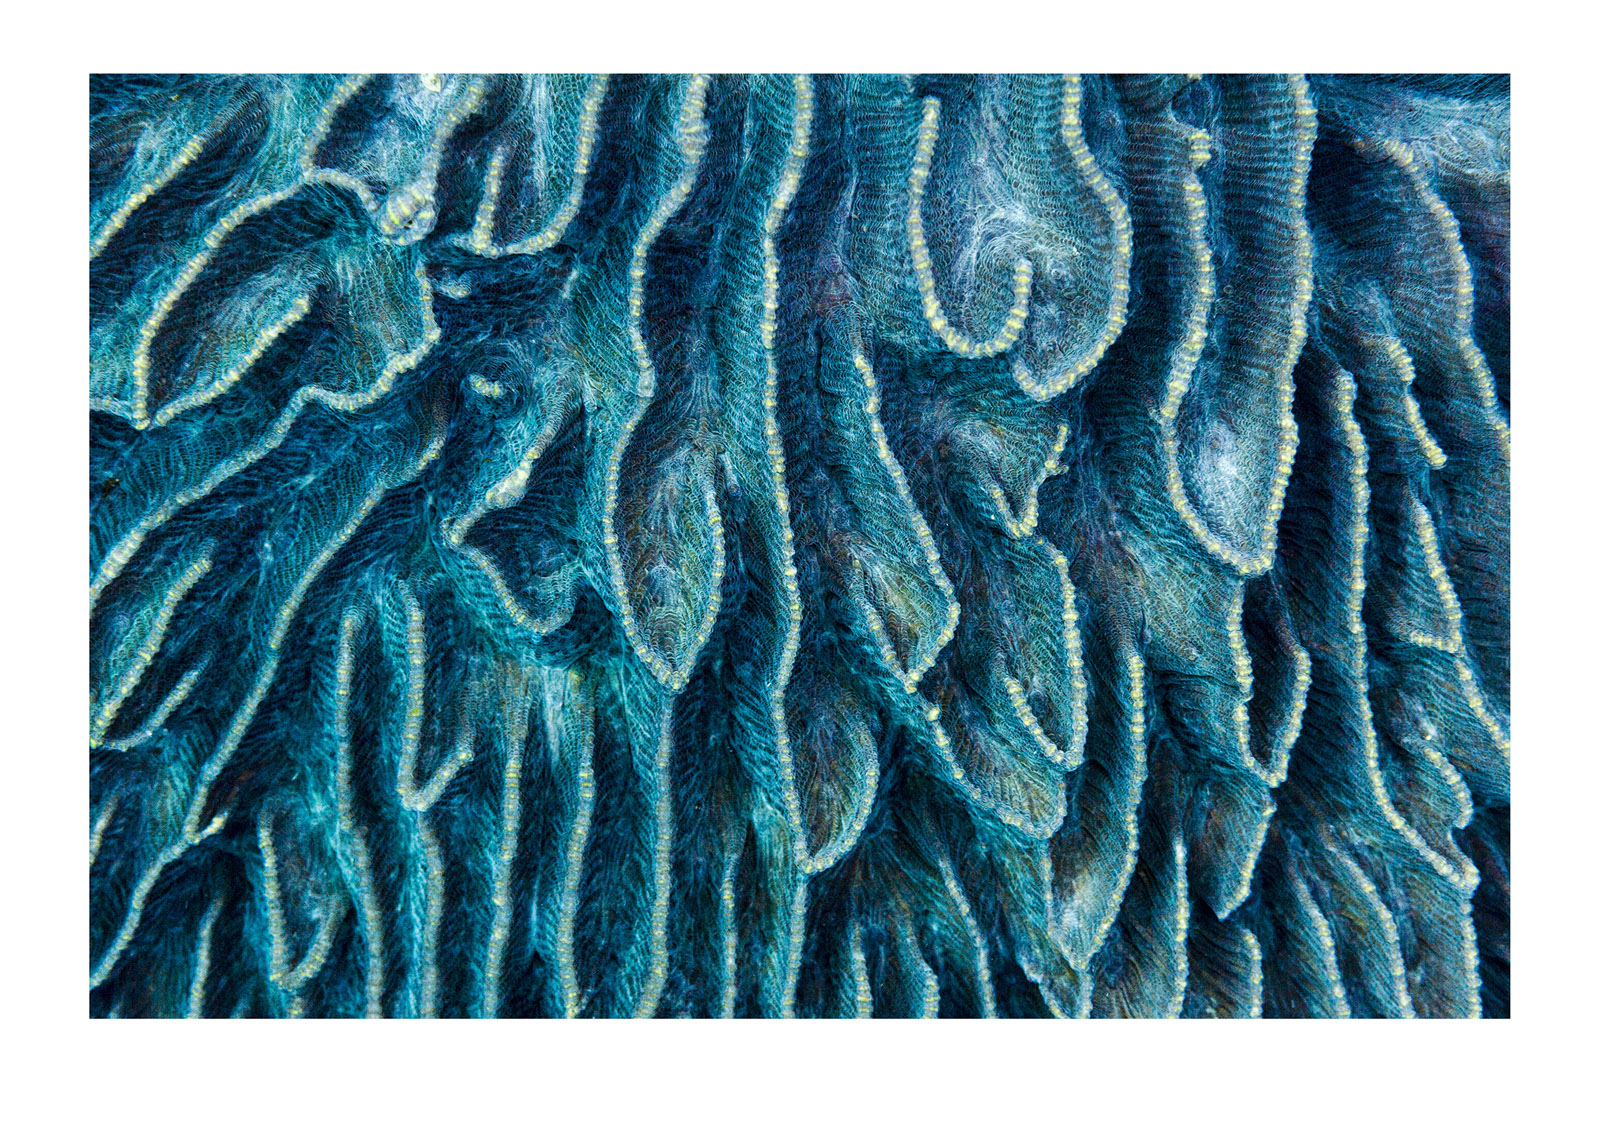 Blue velvet folds in the surface of a hard coral only meters from a pristine sandy beach on a uninhabited island in Raja Ampat. The more you look at corals the more there is to see; search for patterns, contrast, textures and animals. Raja Ampat, West Papua.